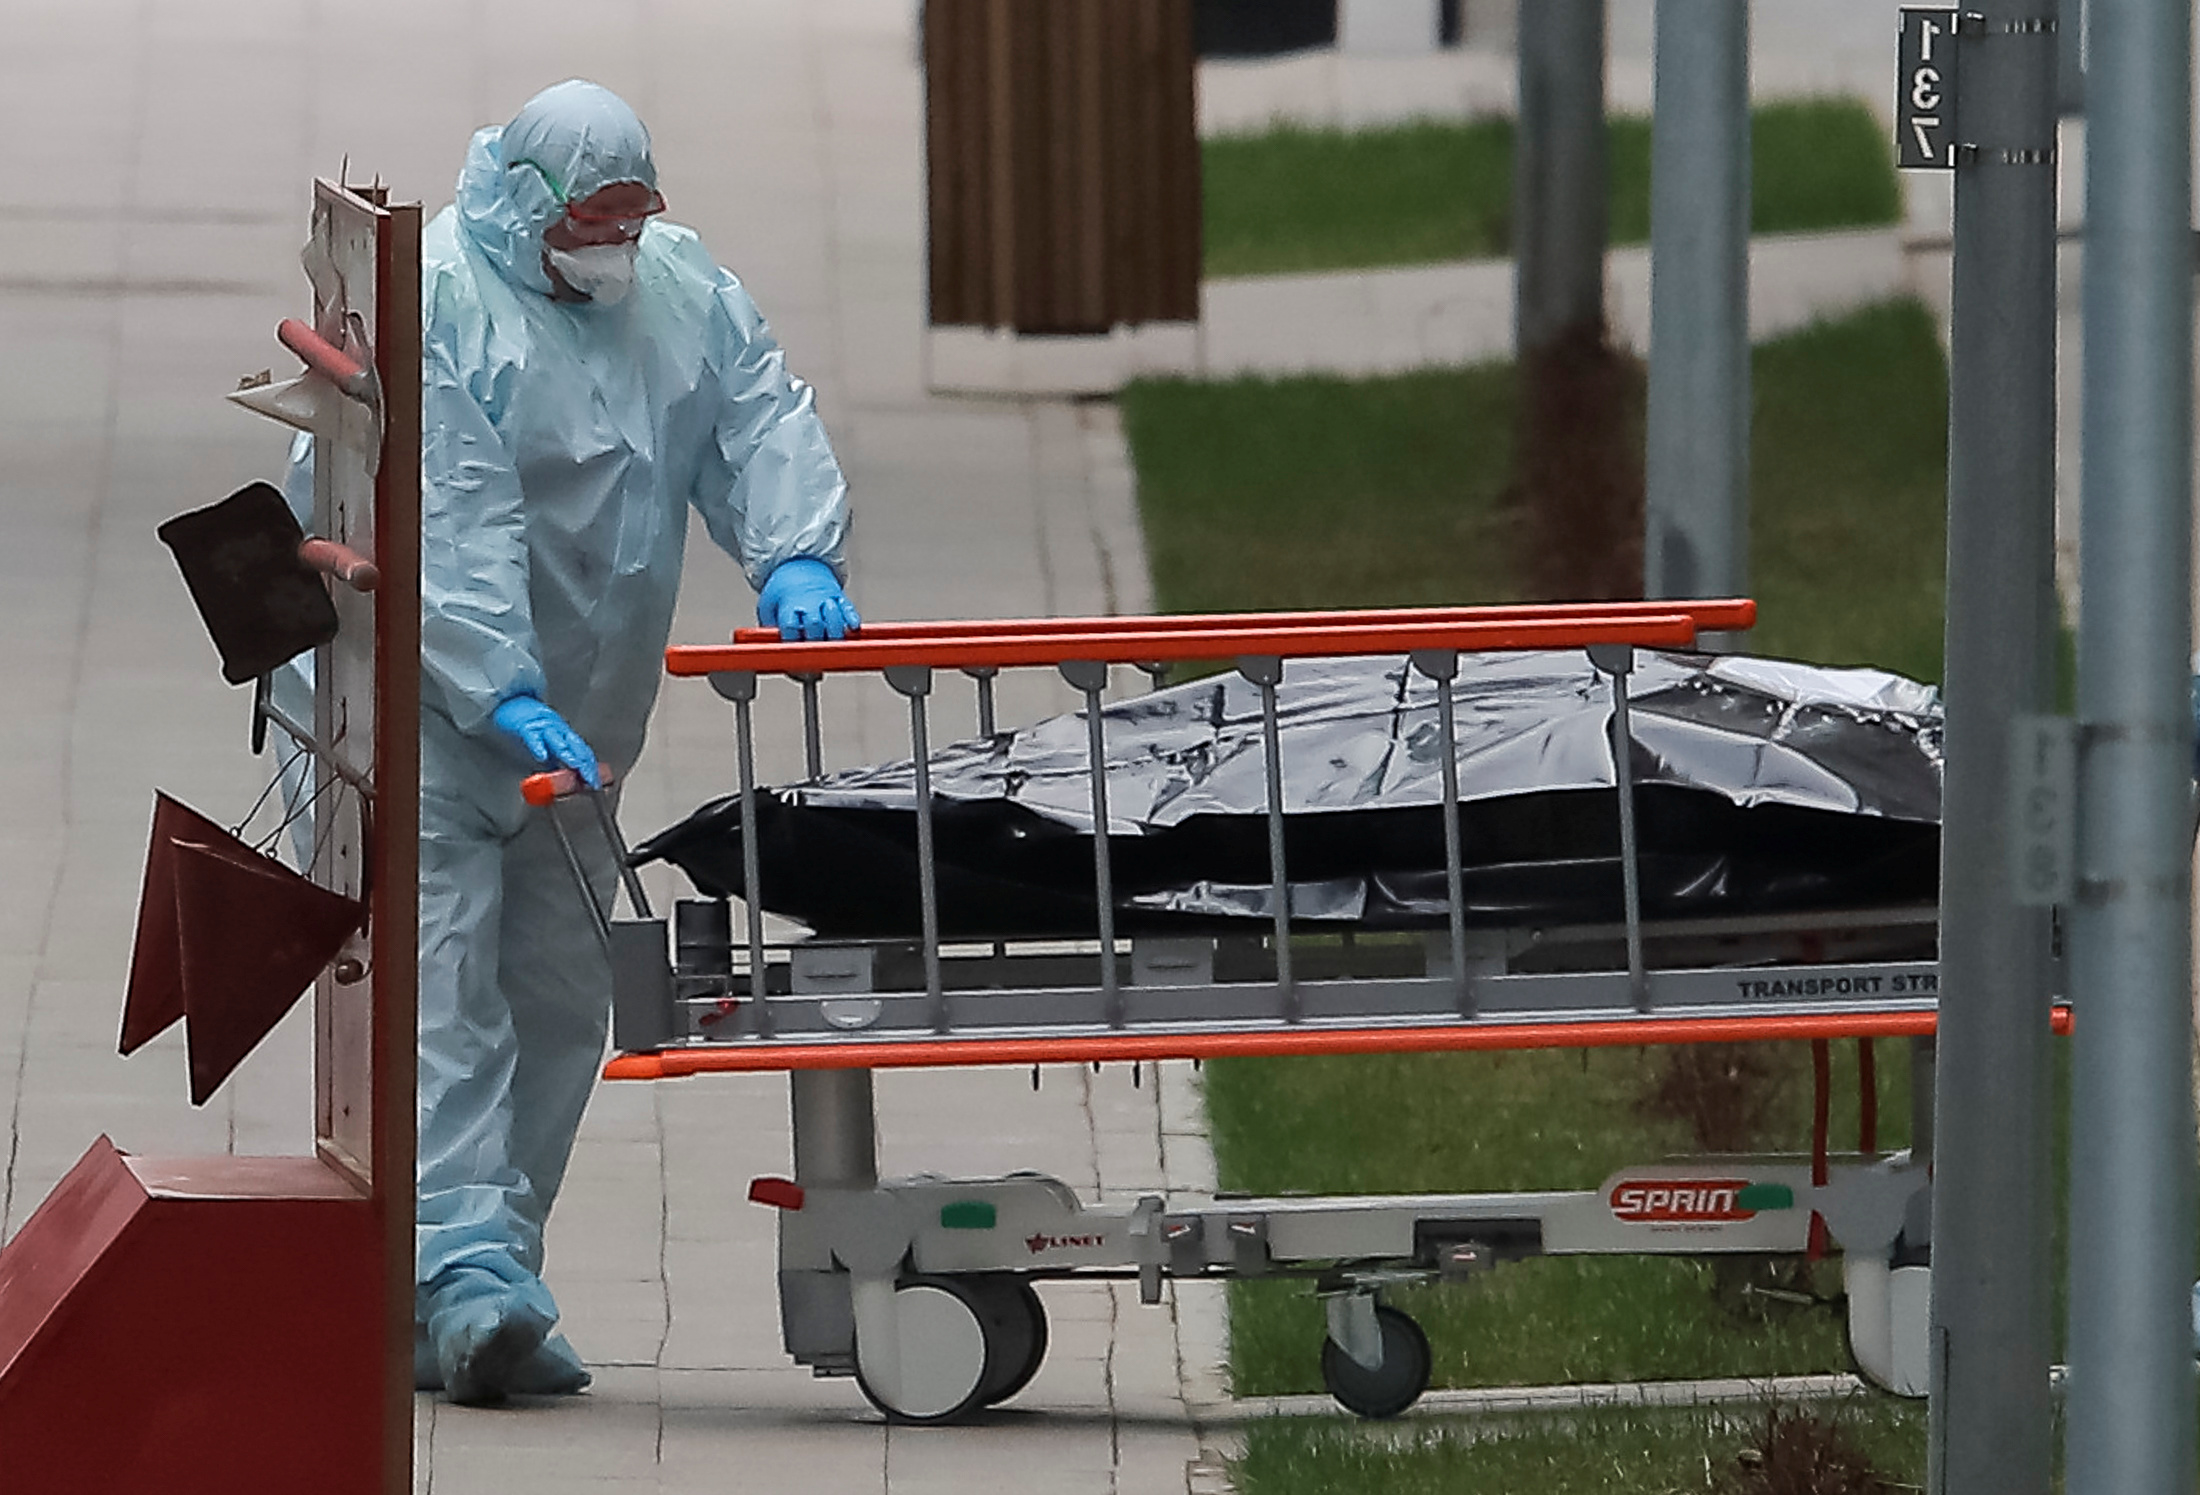 PHOTO: A medical specialist wearing protective gear pulls a stretcher toward an ambulance while relocating a bag, which presumably contains a human body, outside a hospital for patients infected with coronavirus on the outskirts of Moscow, April 20, 2020.